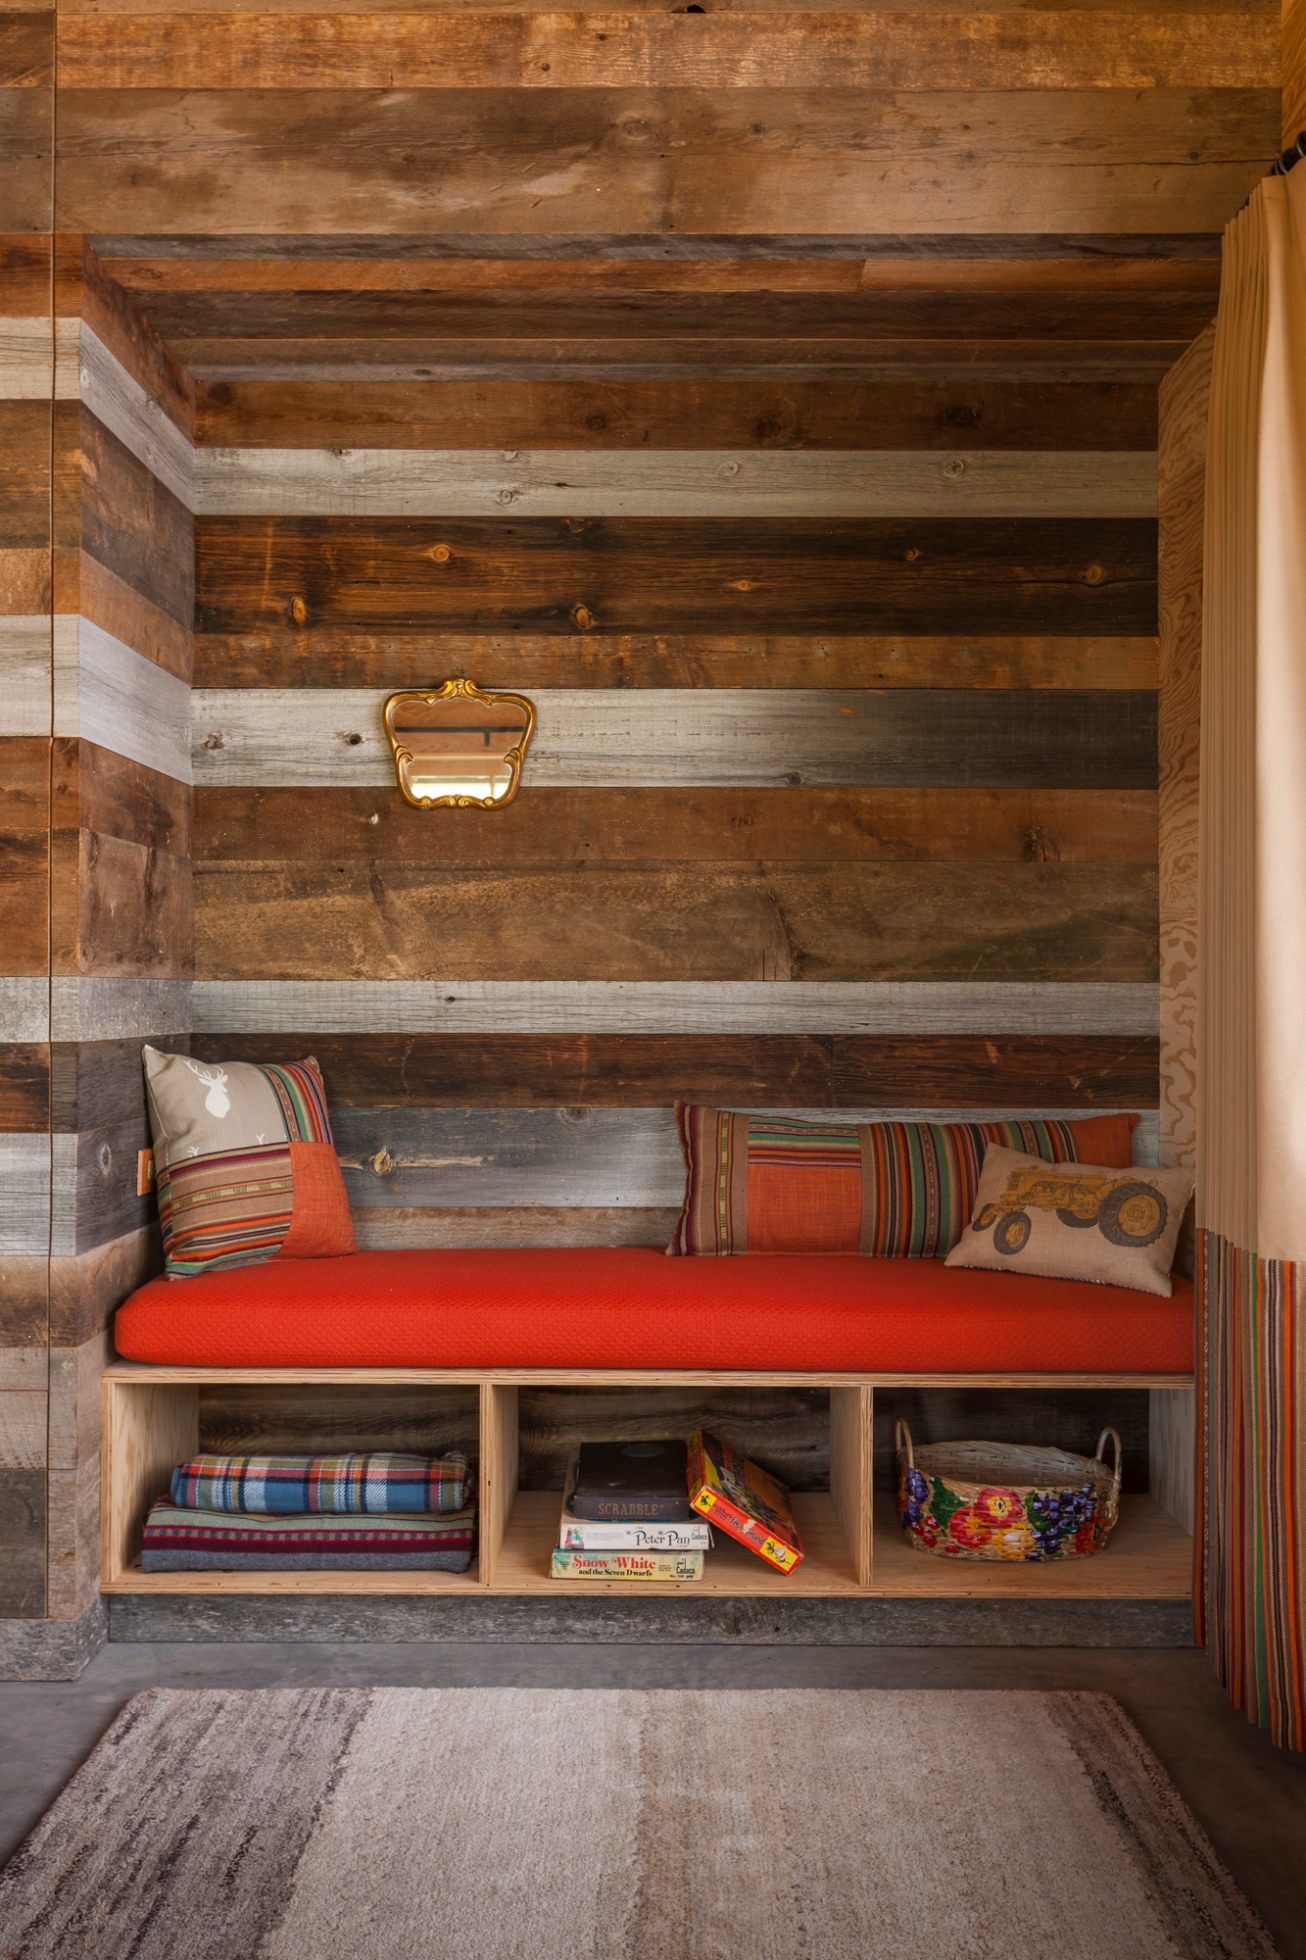 An eclectic cabin aesthetic includes reclaimed wood from the property’s 1890s barn.